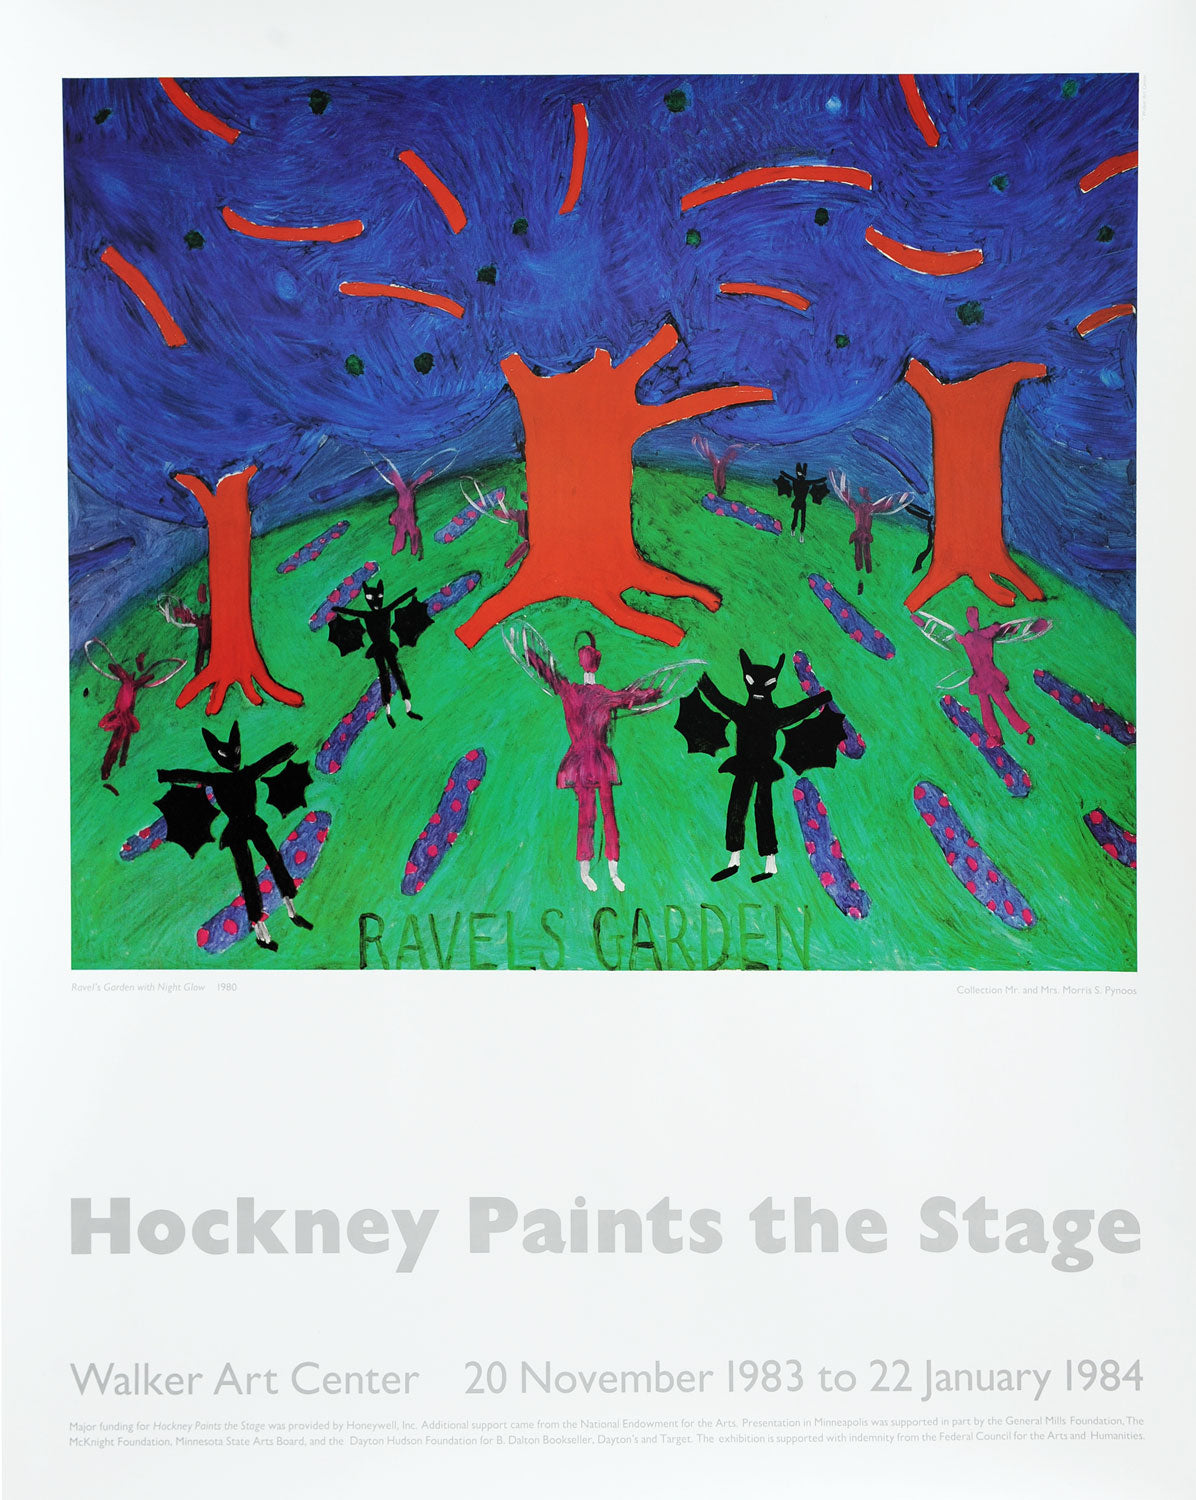 Hockney Paints the Stage